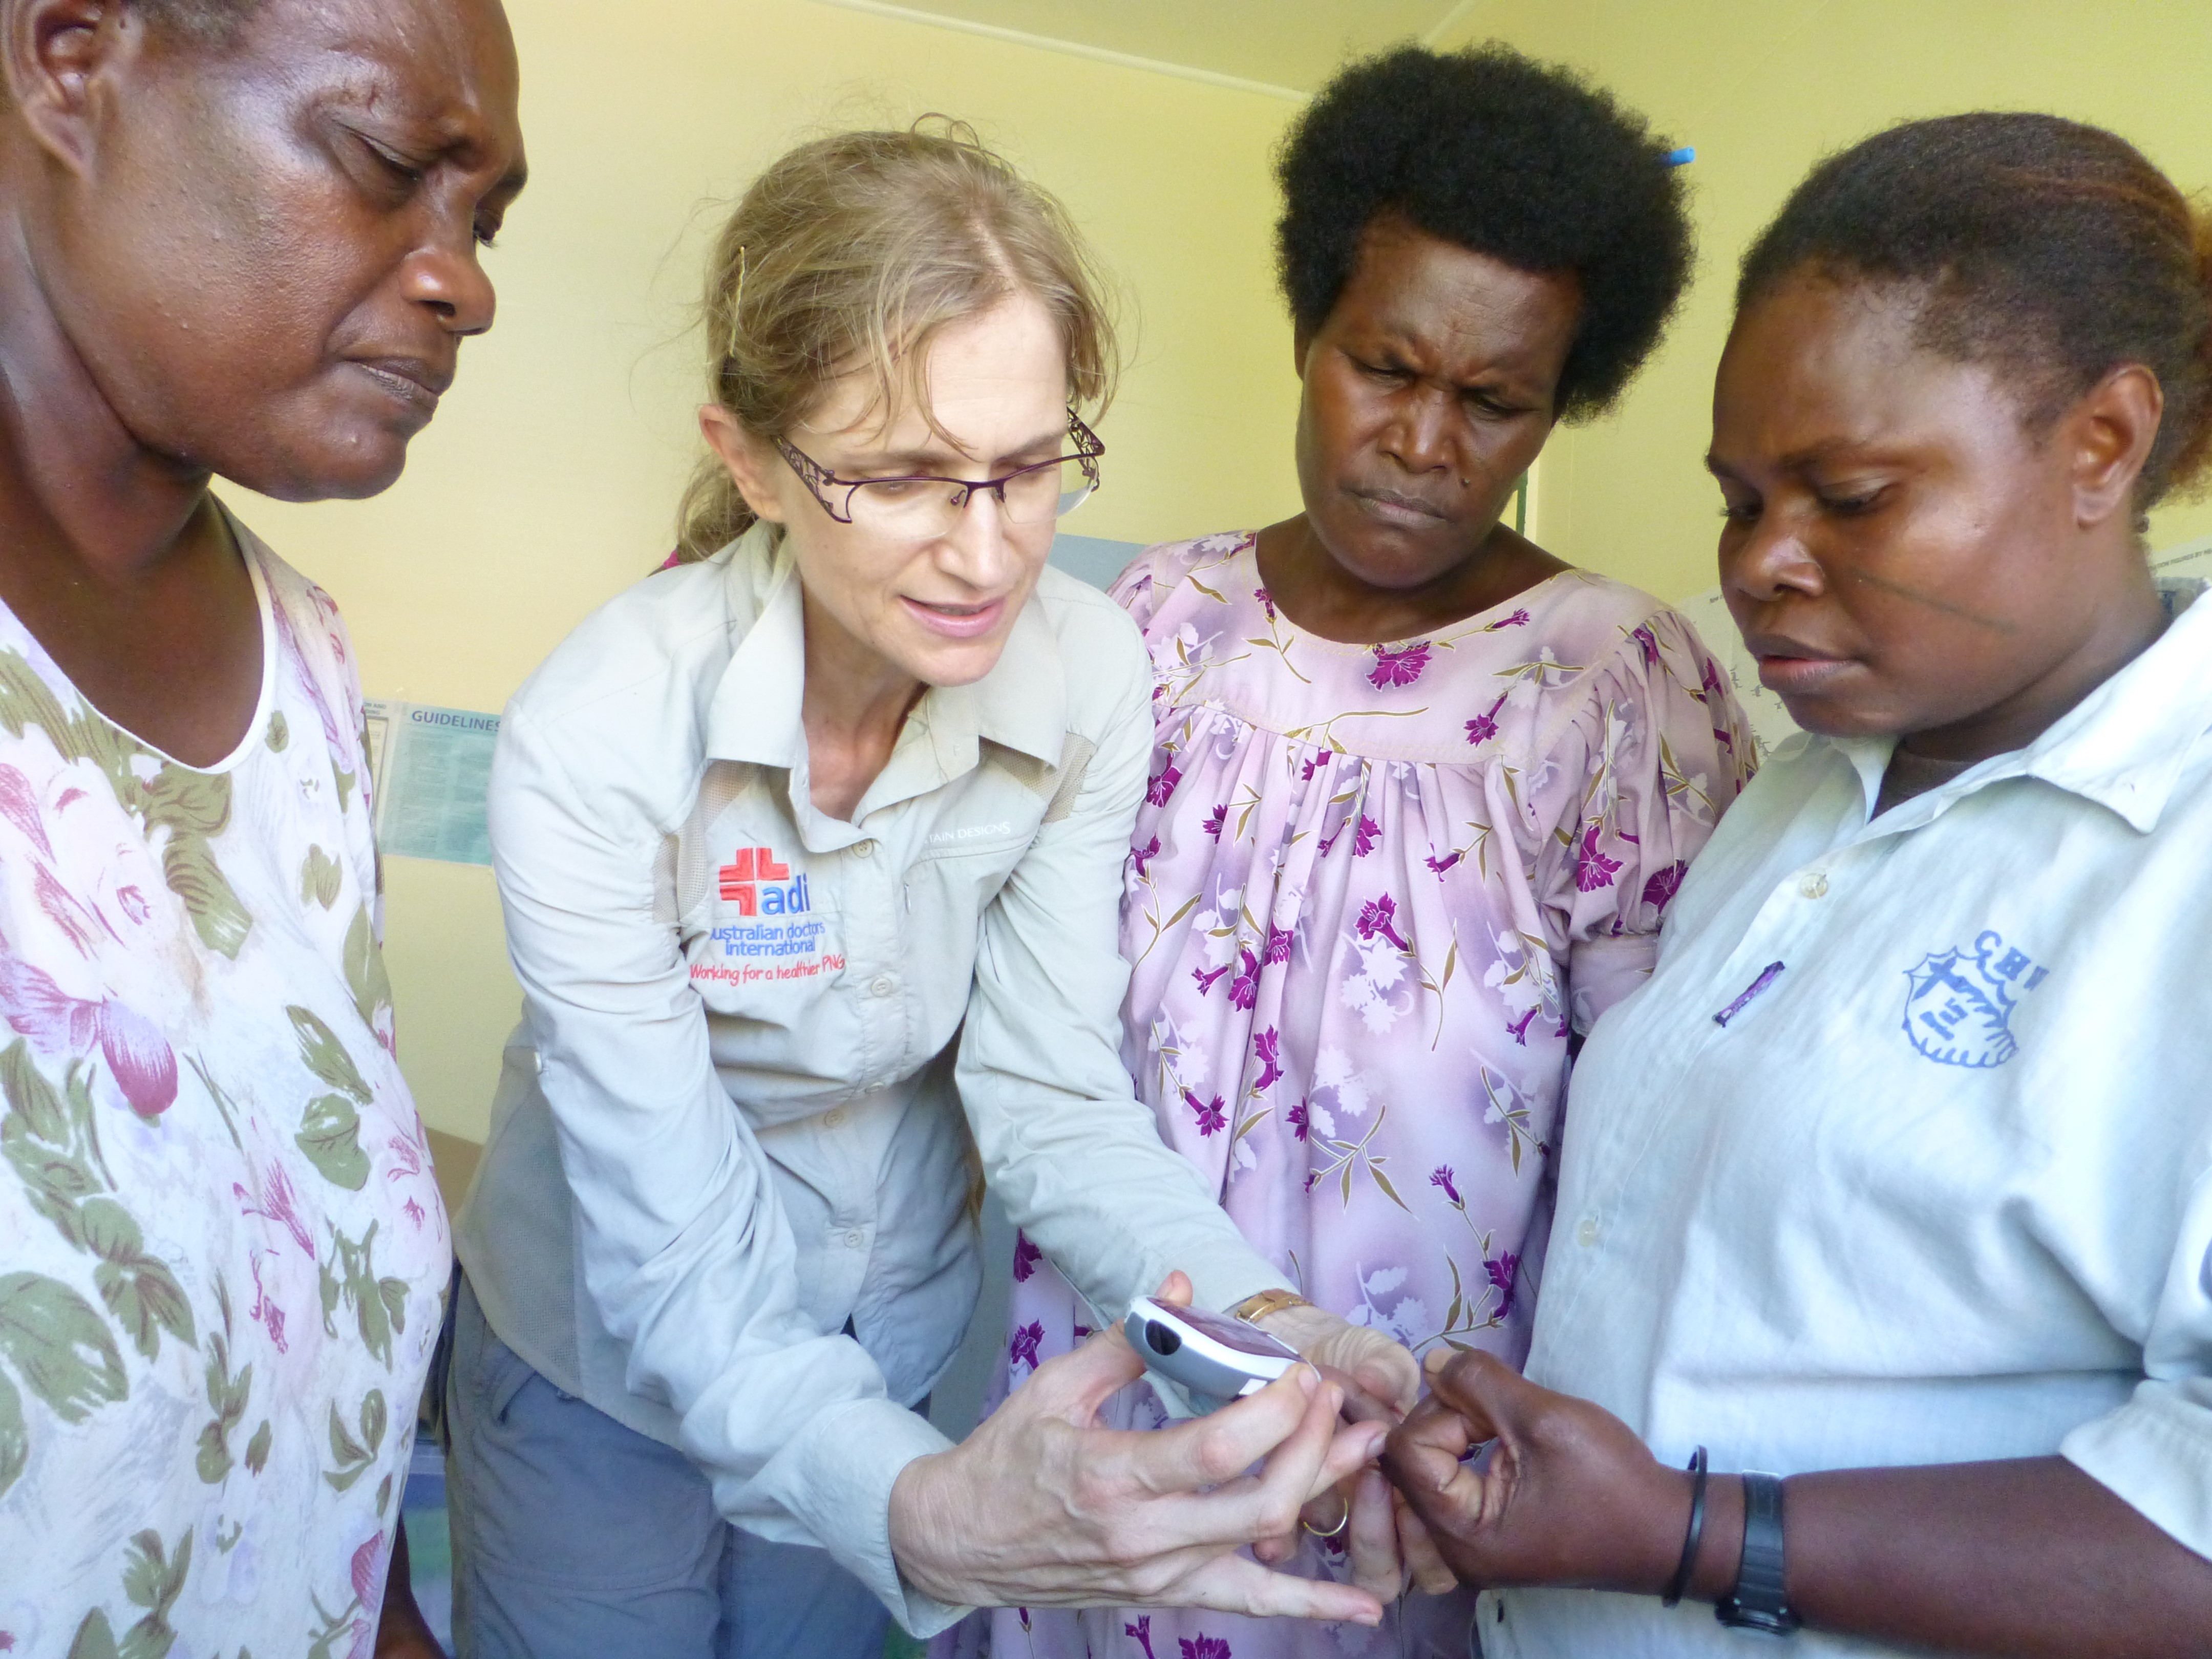 Dr Merrilee Frankish and PNG colleagues (Credit: Australian Doctors International)